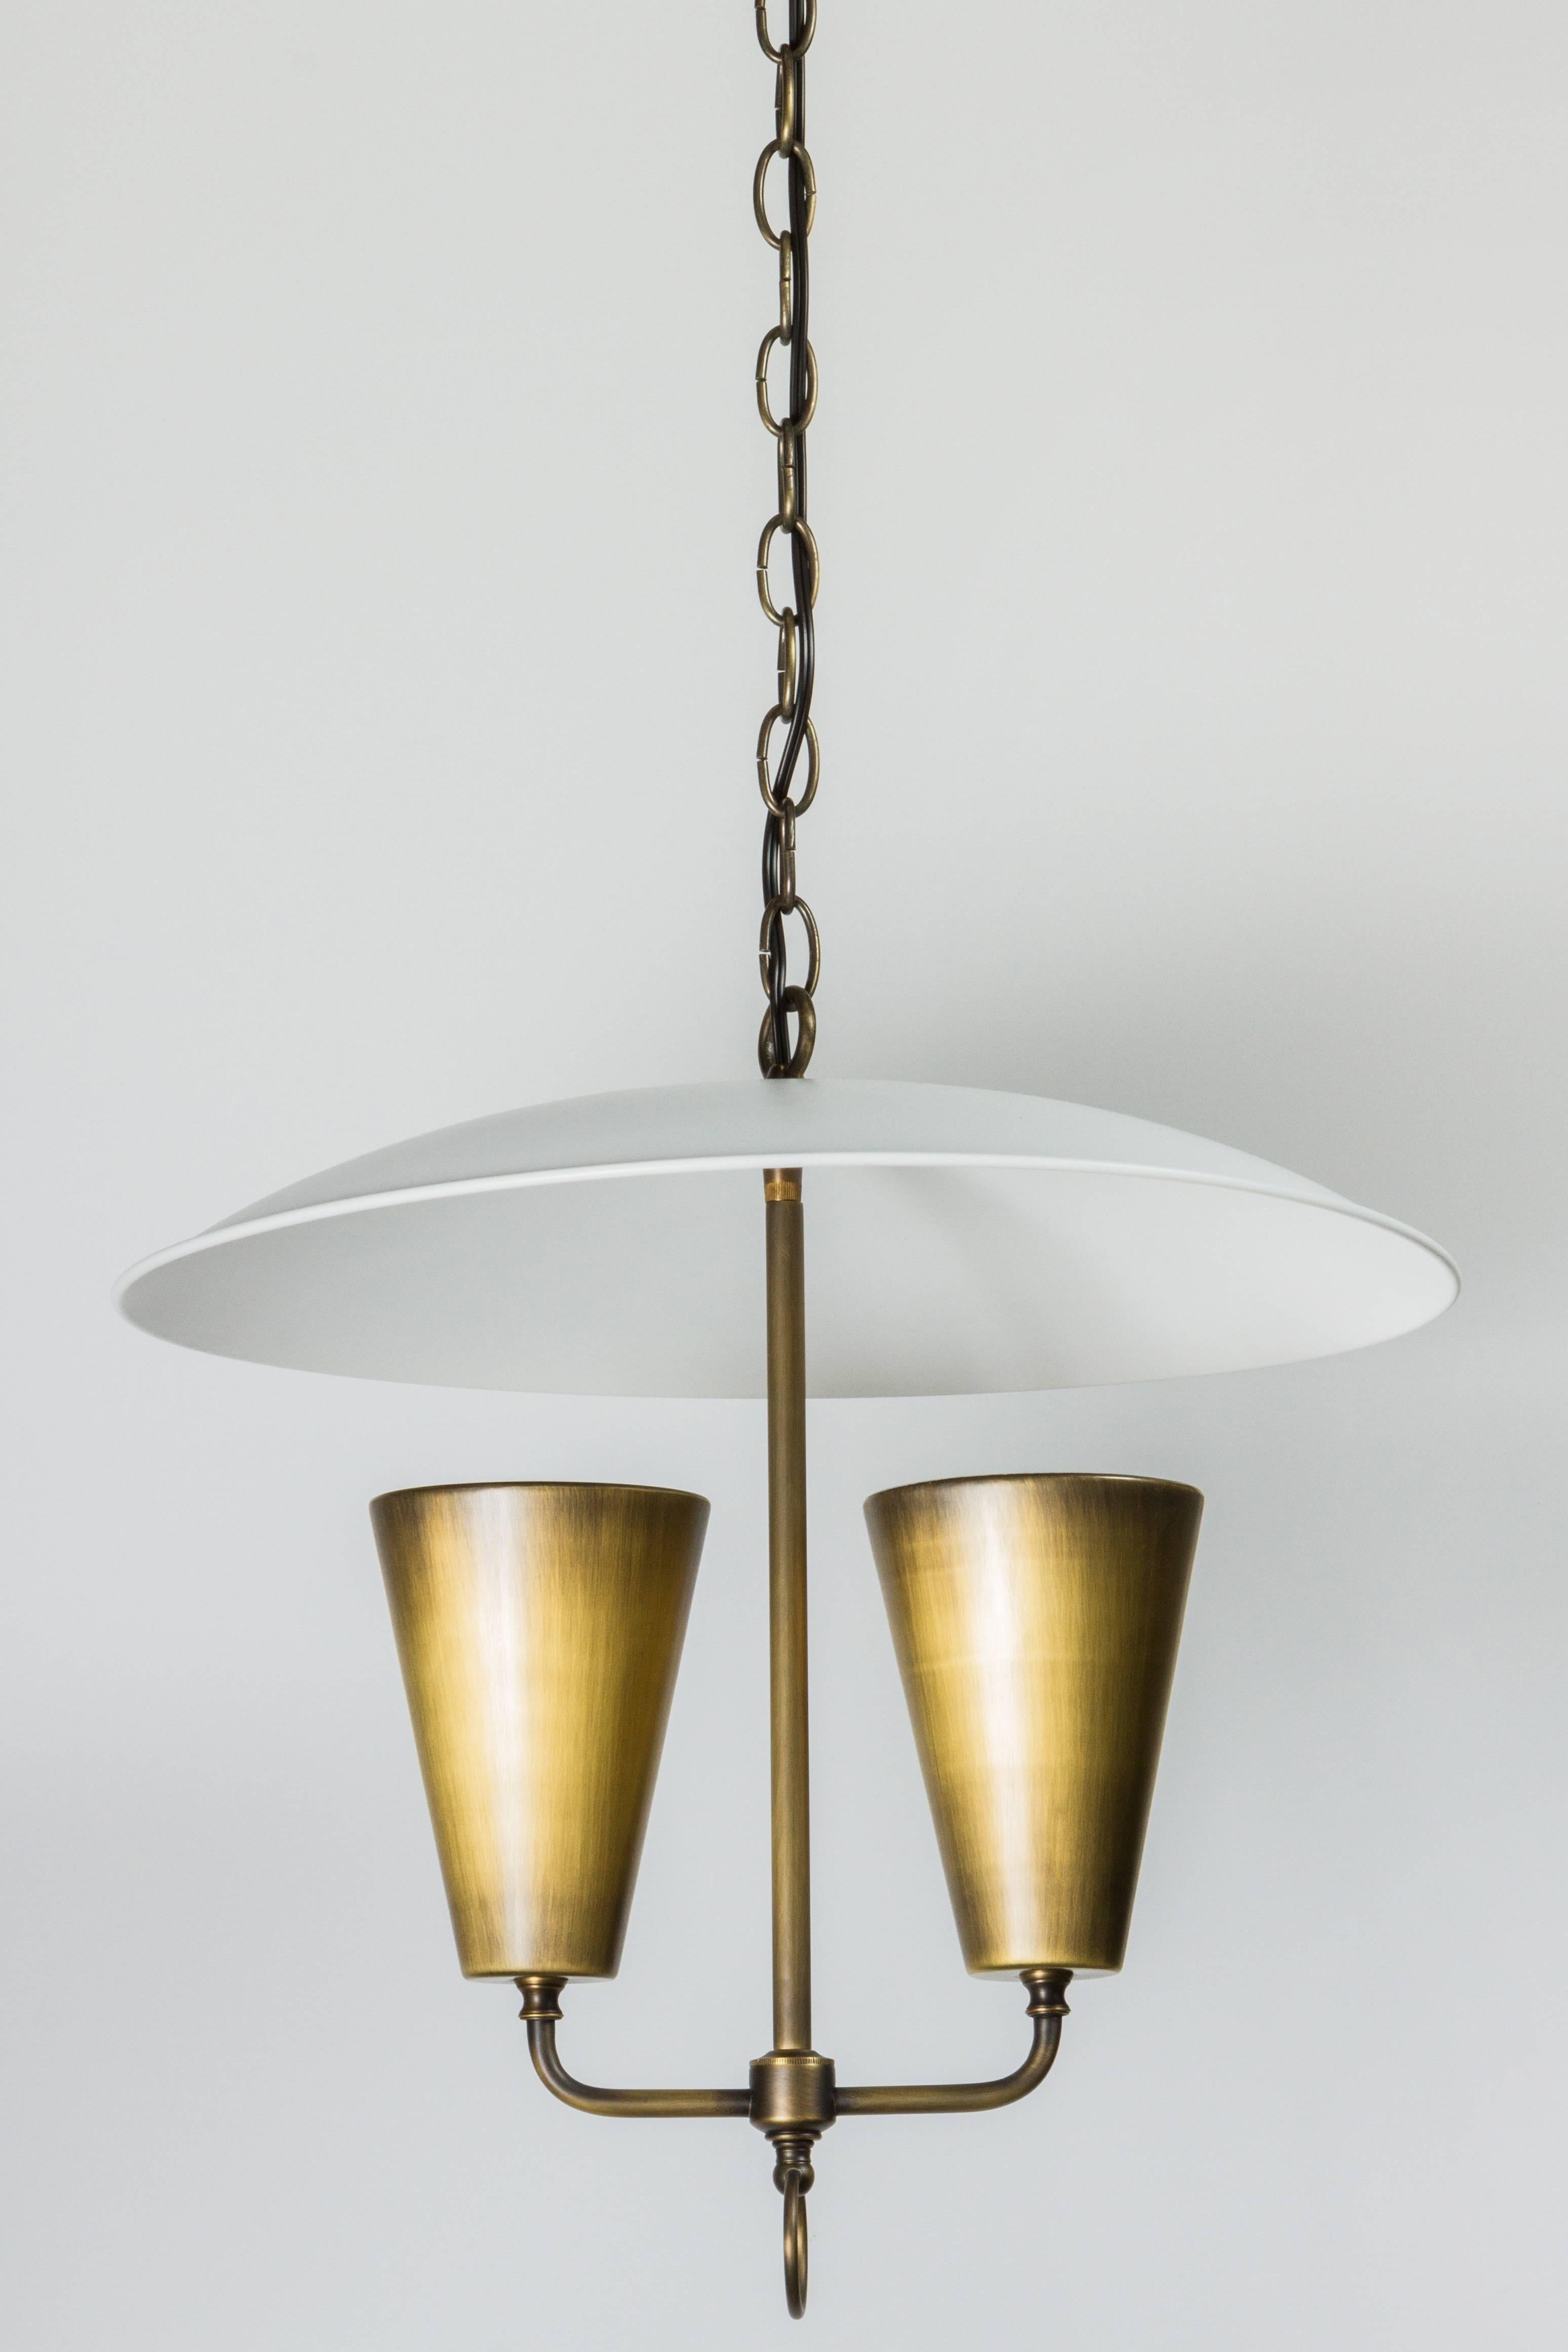 Mid-century brass pendant, Lightolier style, dome-shape. Restored with new finish and electrical. Total drop height with canopy, chain, fixture is 52 inches.